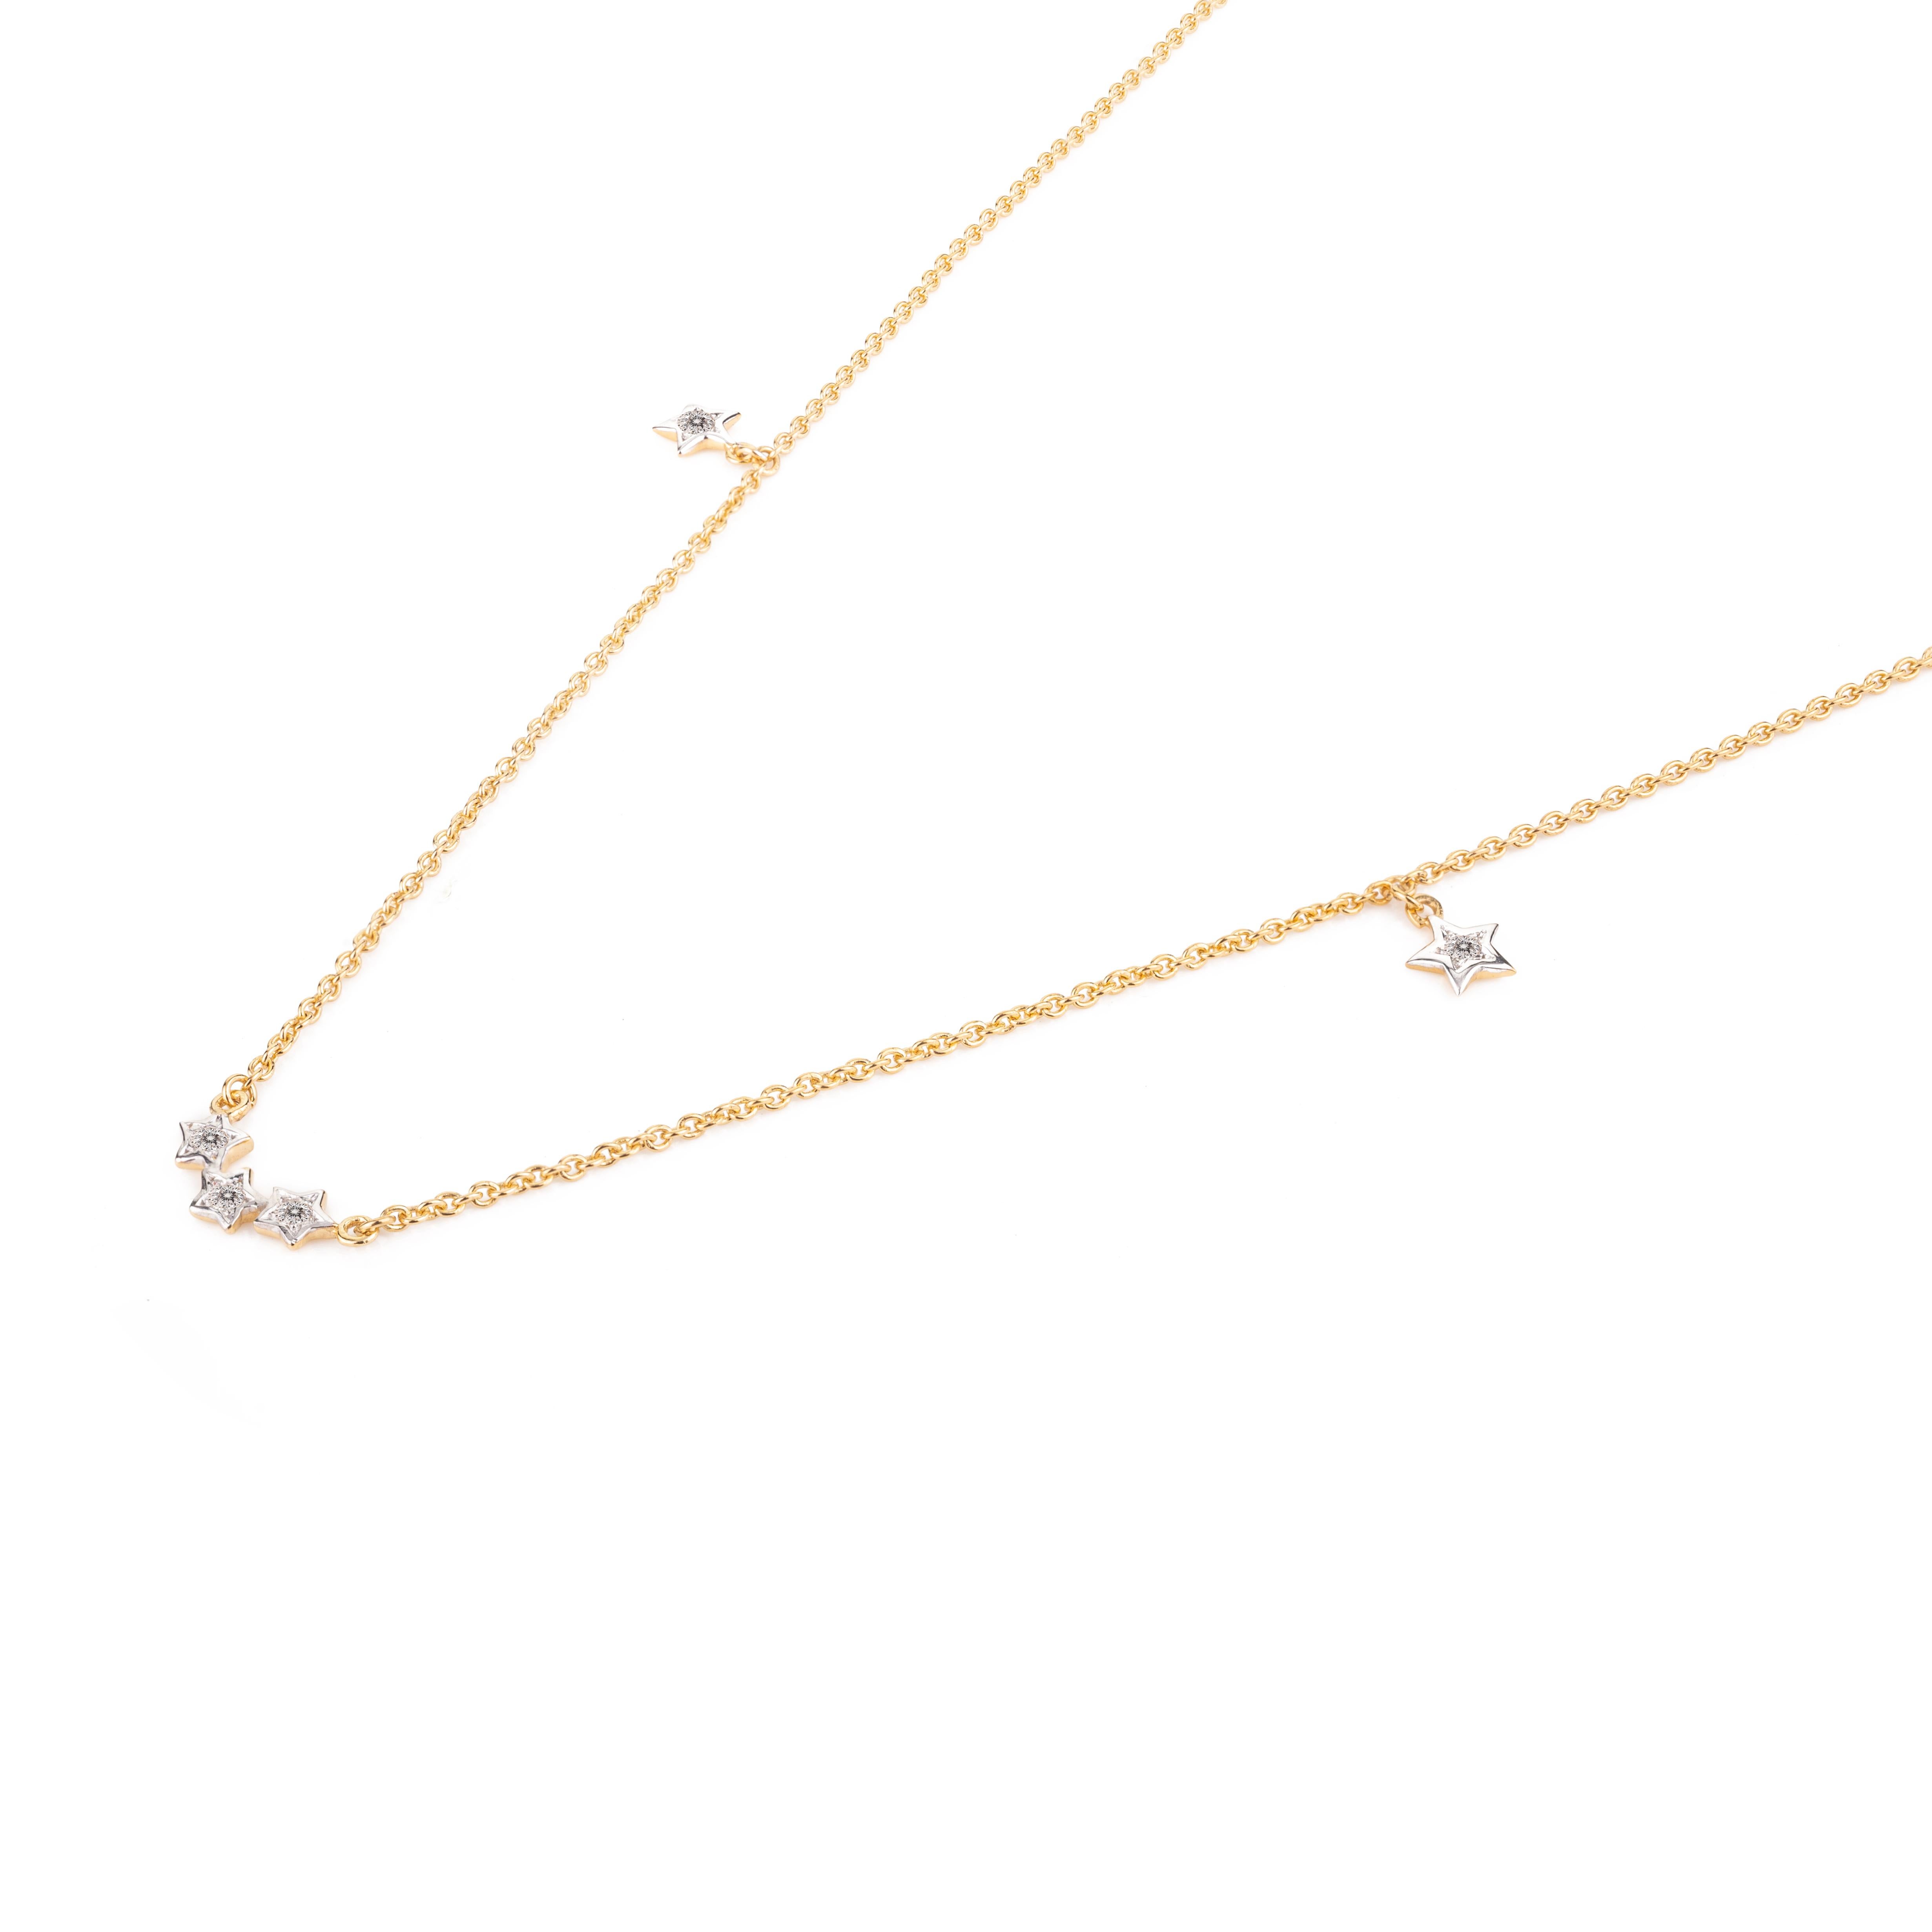 Modernist 14 Karat Solid Yellow Gold Diamond Star Everyday Necklace for Her For Sale